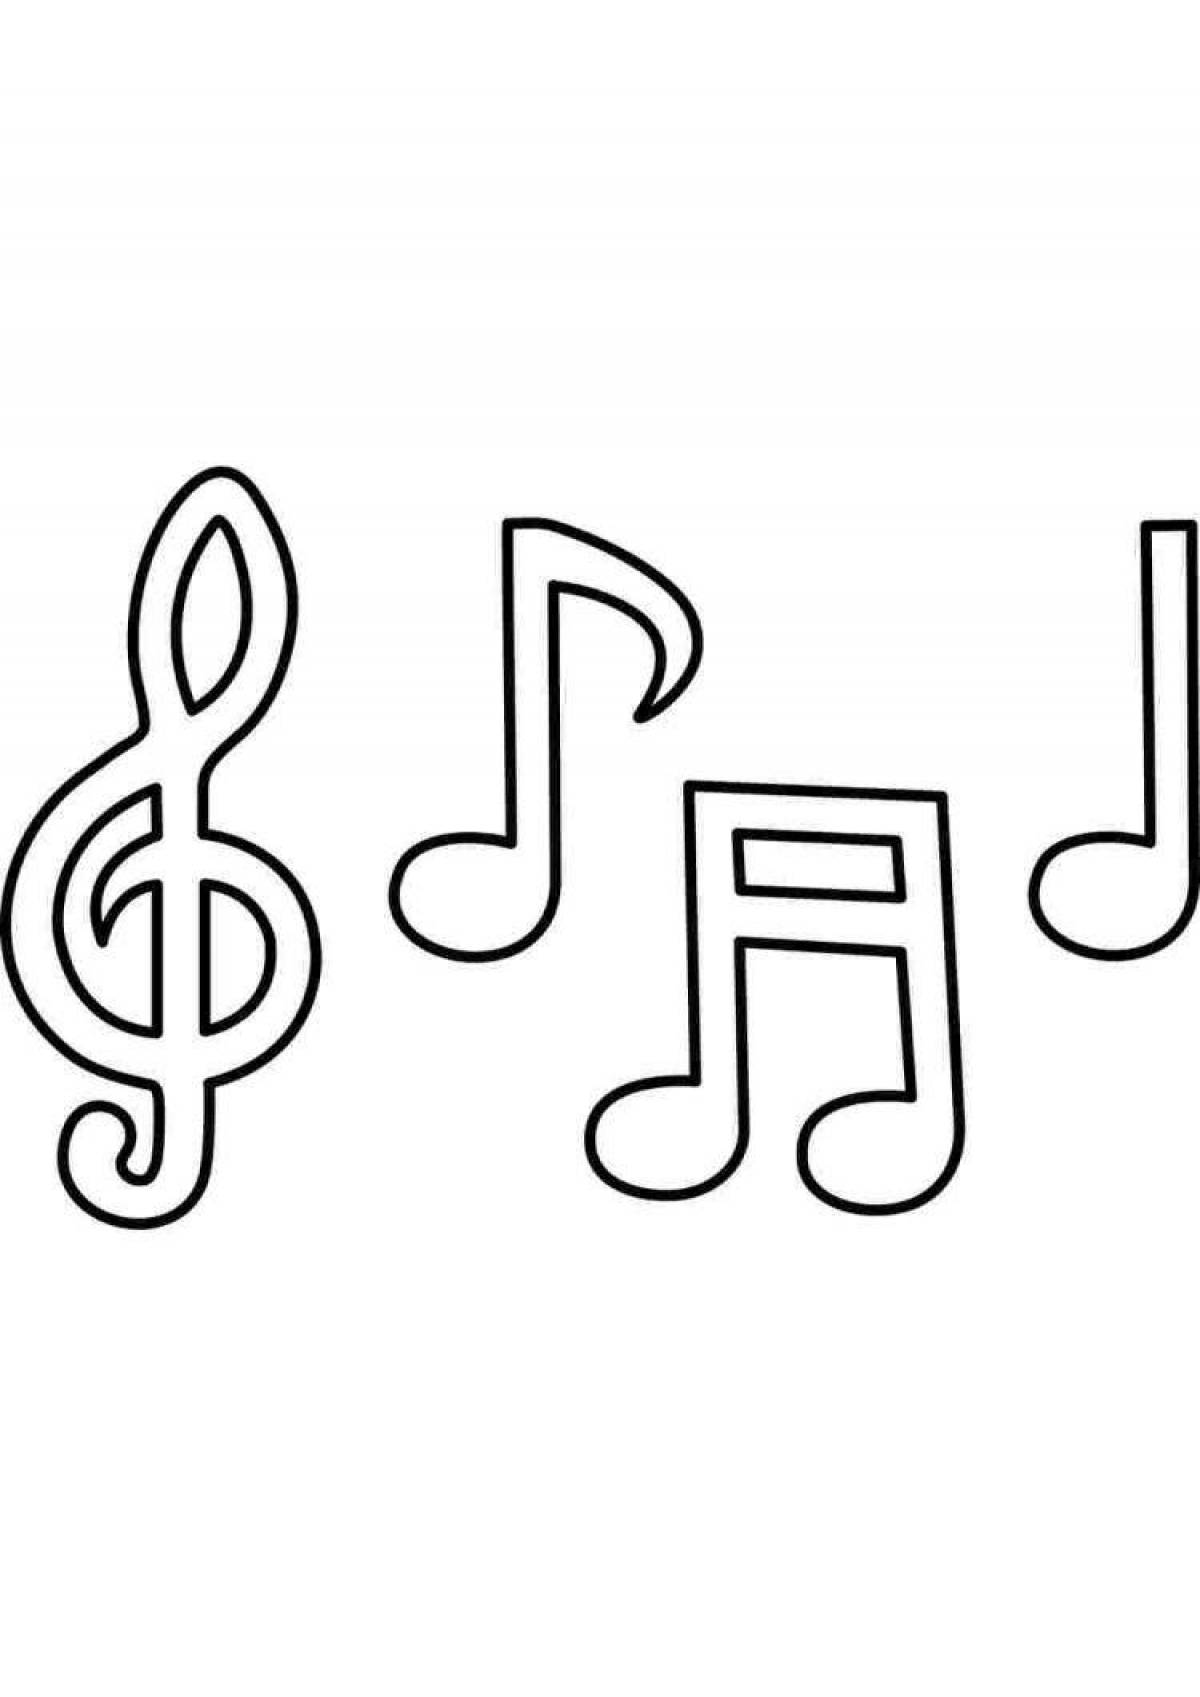 Colouring energetic musical note